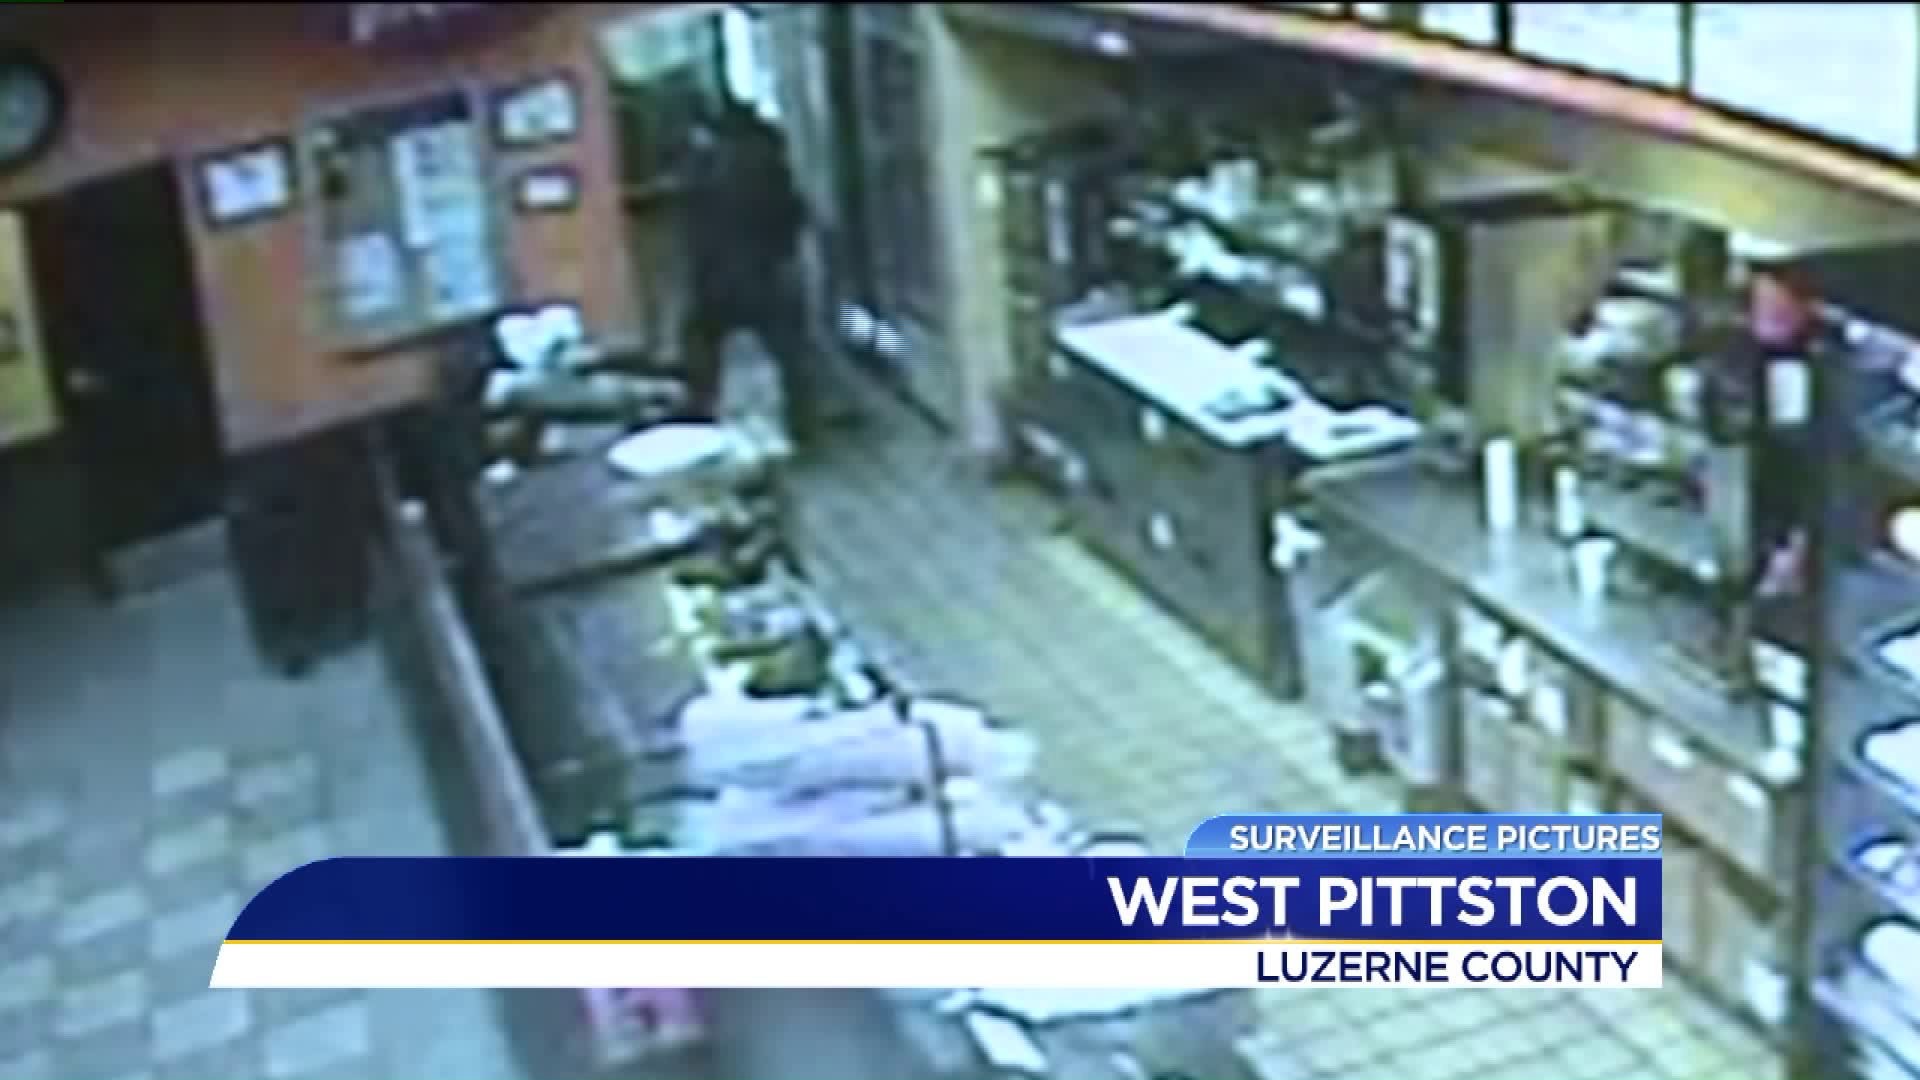 Armed Robbery in Luzerne County